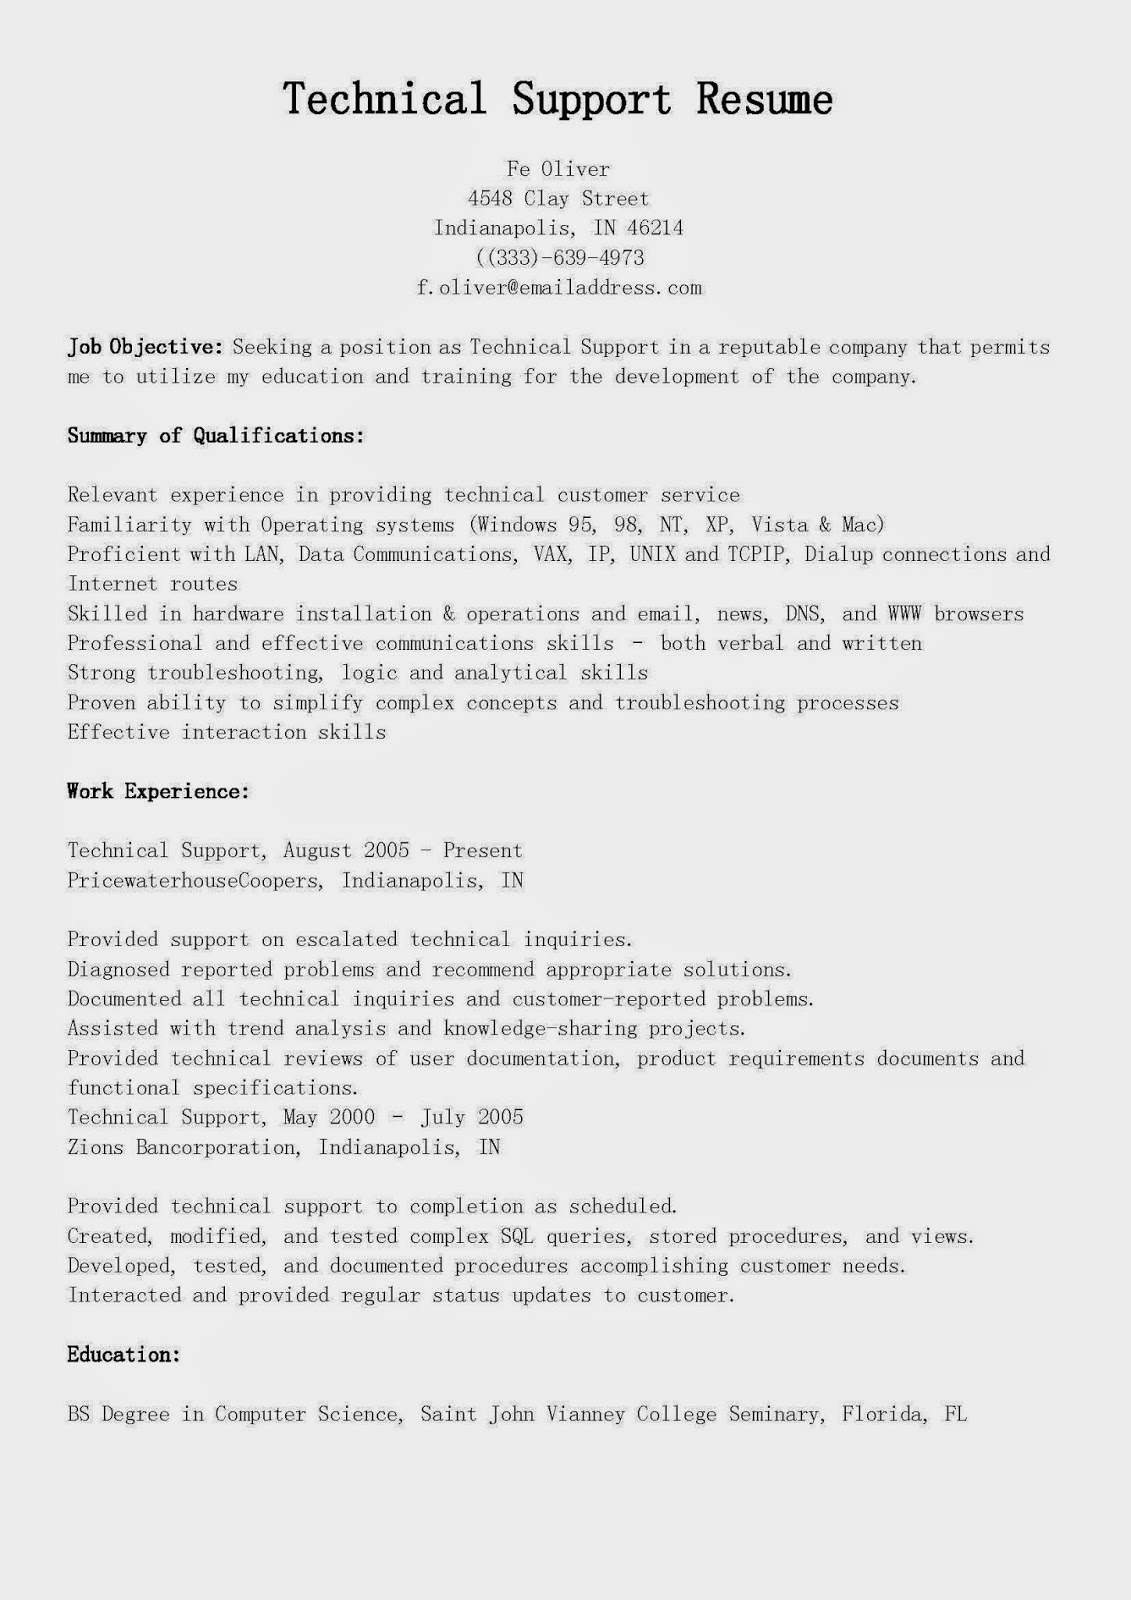 Resume for application support manager